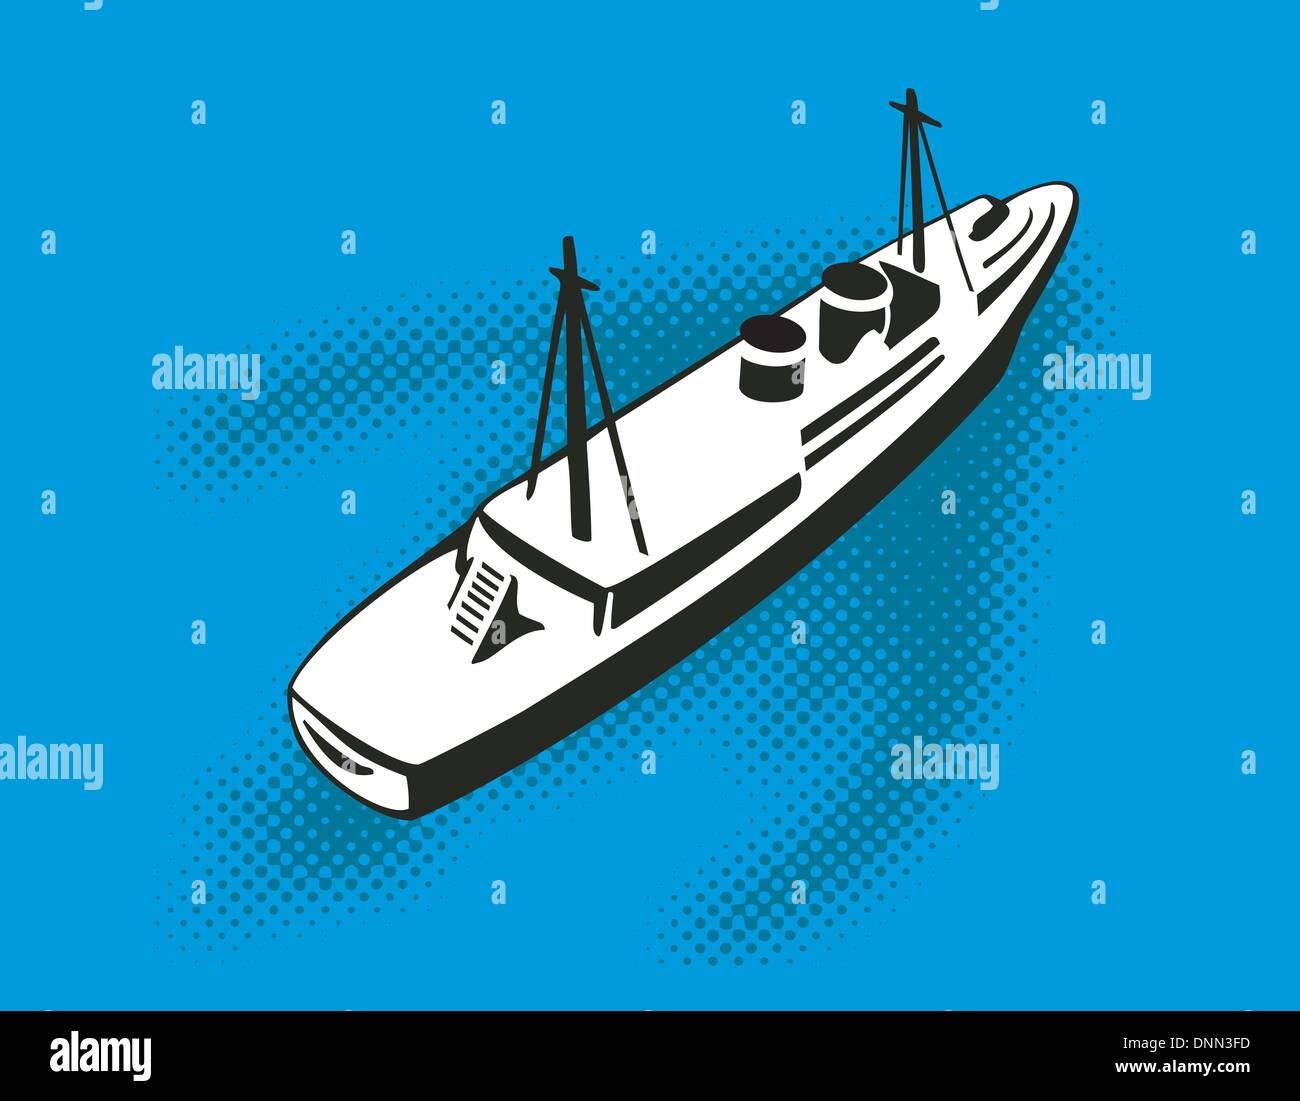 illustration of a passenger cargo ship aerial view done in retro style Stock Vector